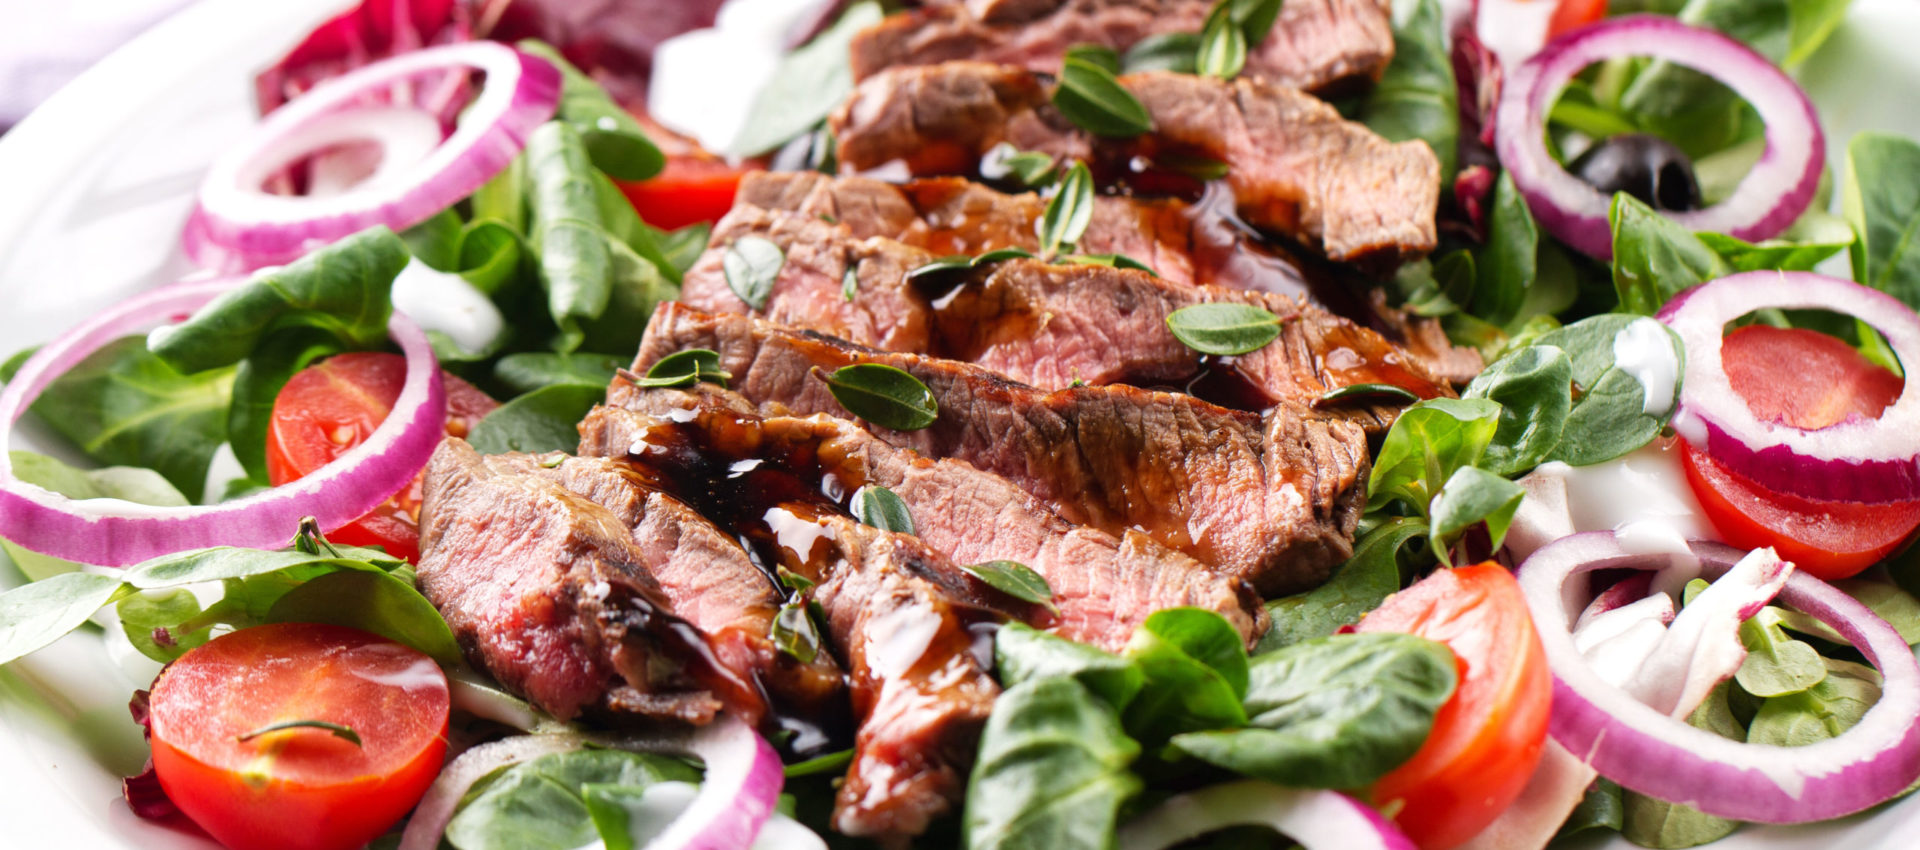 Tangy Beef Salad